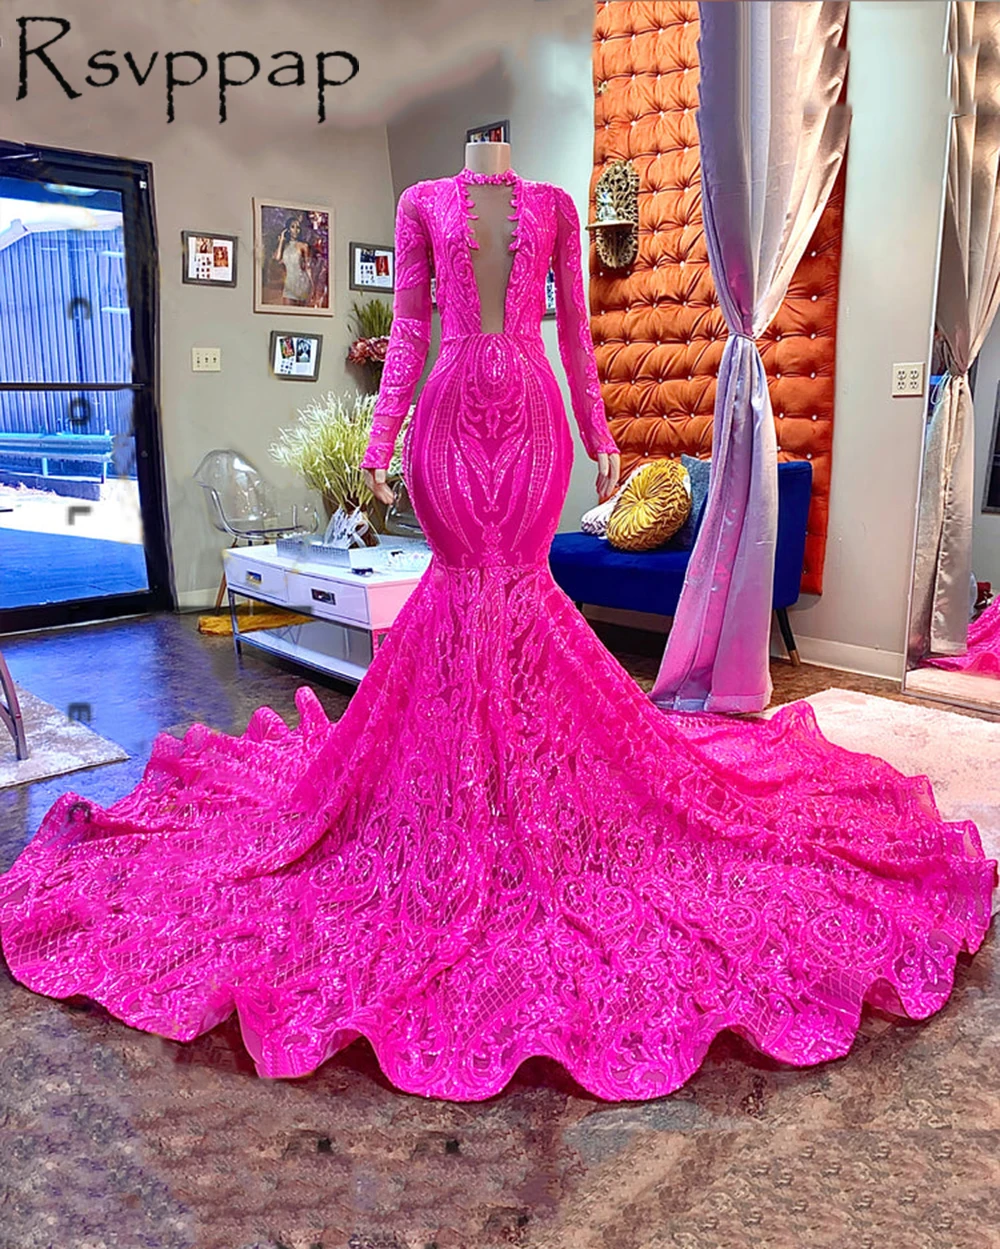 prom & dance dresses Hot Pink Mermaid Long Prom Dresses 2022 African Black Girl Long Sleeves Sparkly Sequin Luxury Party Prom Dress plus size prom dresses Prom Dresses